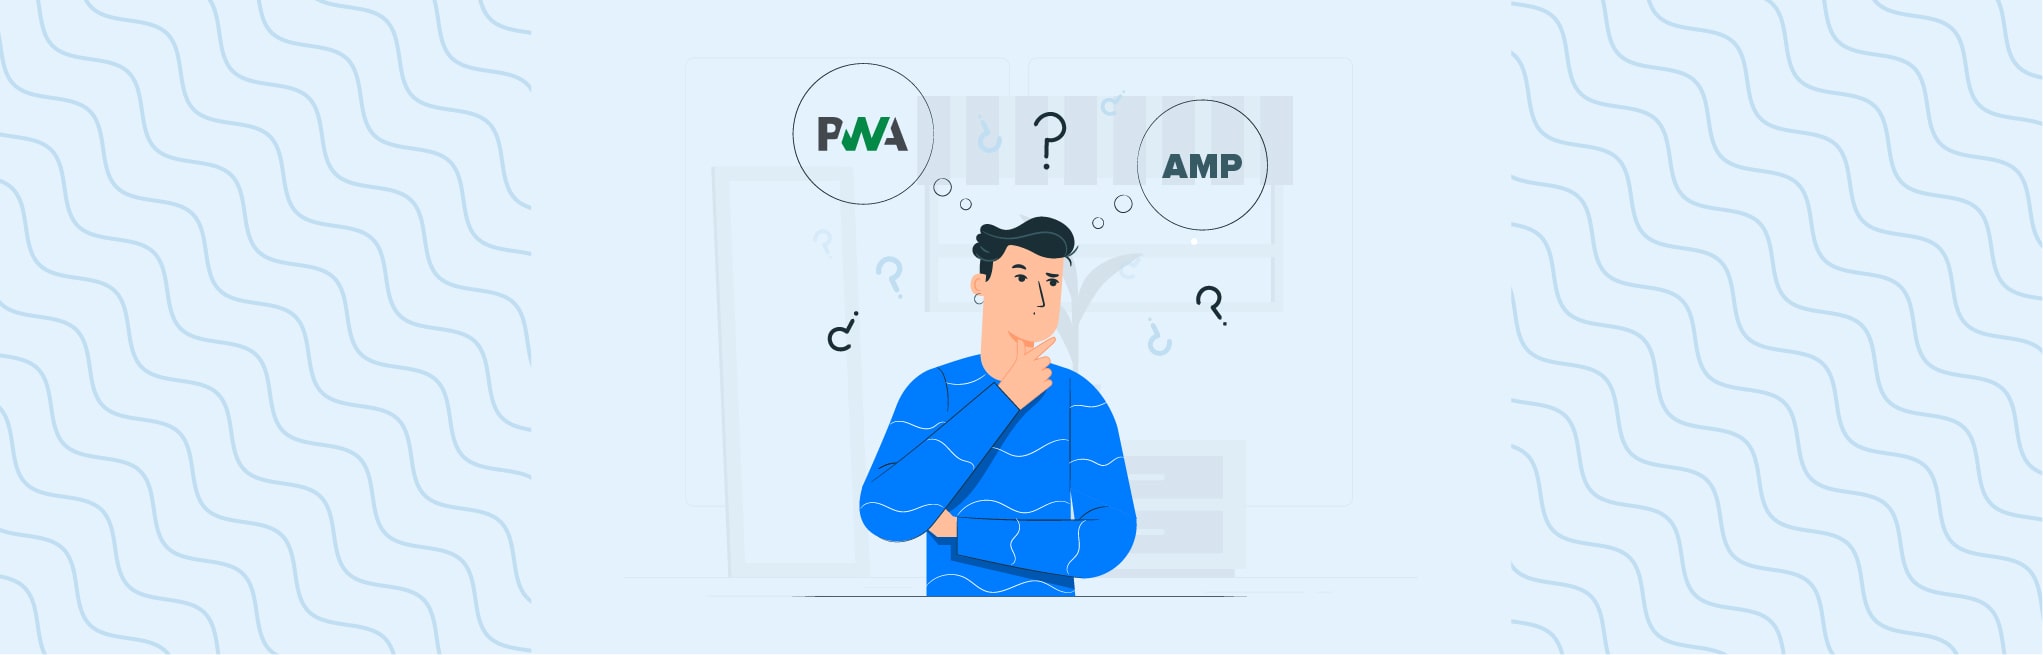 PWA-AMP-or-PWAMP-which-one-is-good-for-your-business